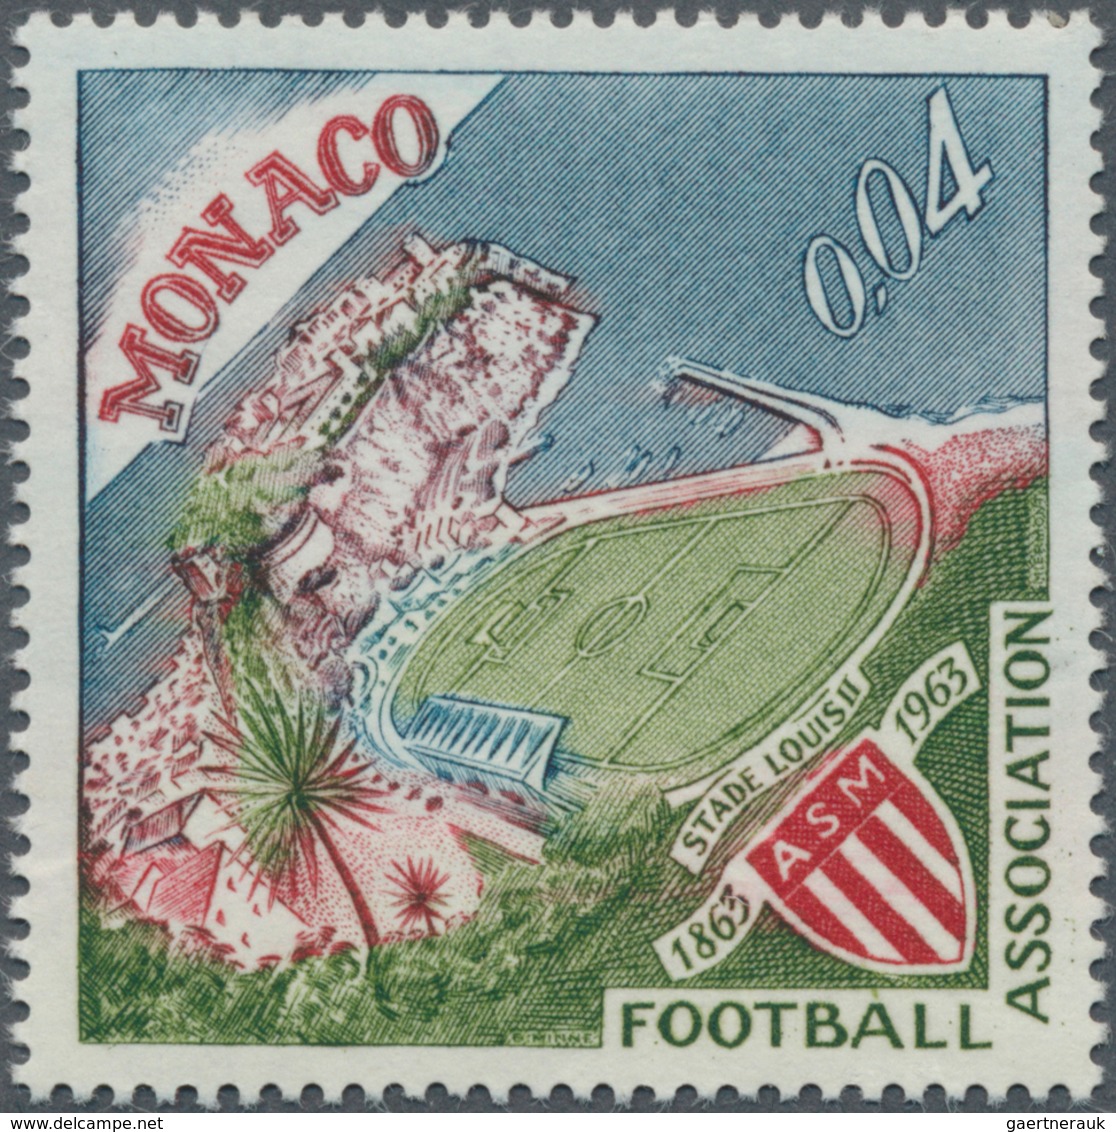 01547 Monaco: 1963, French Champion "AS Monaco", 0.04fr. Without Surcharge, Not Issued, Unmounted Mint, Ce - Unused Stamps